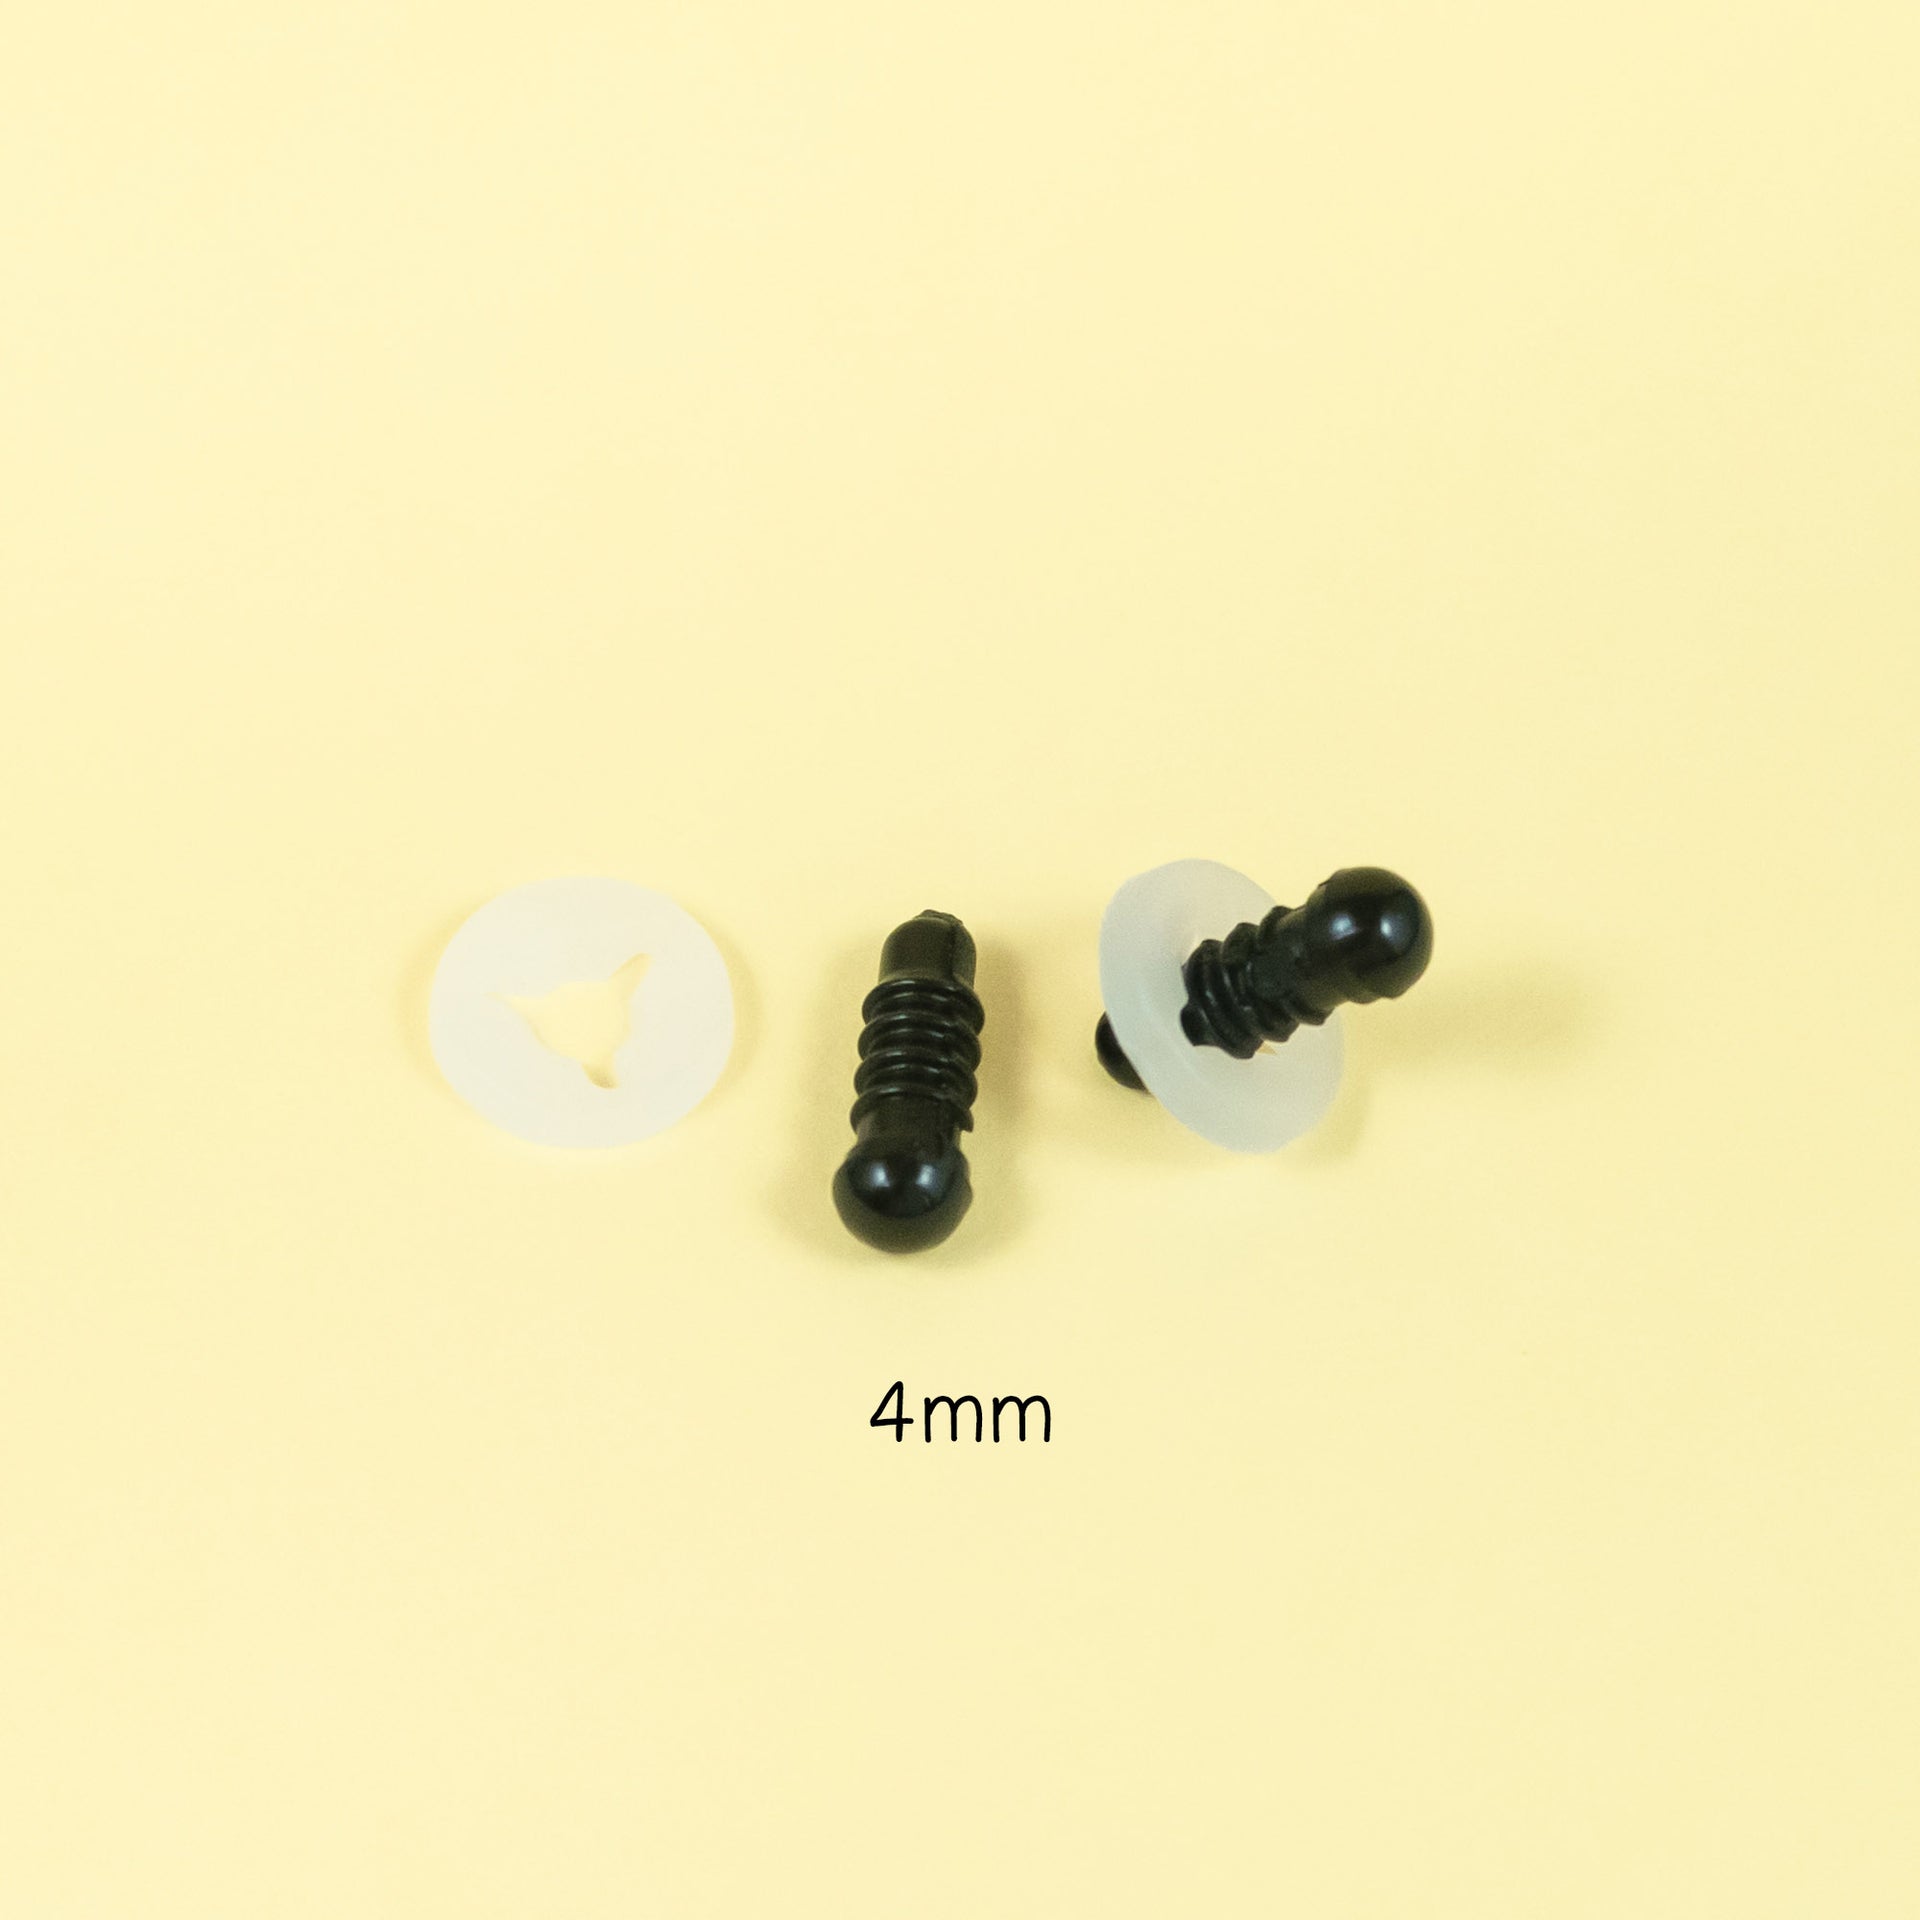 12 PAIR Black Safety Eyes With Washers 5mm 6mm 7mm 8mm 9mm 10mm